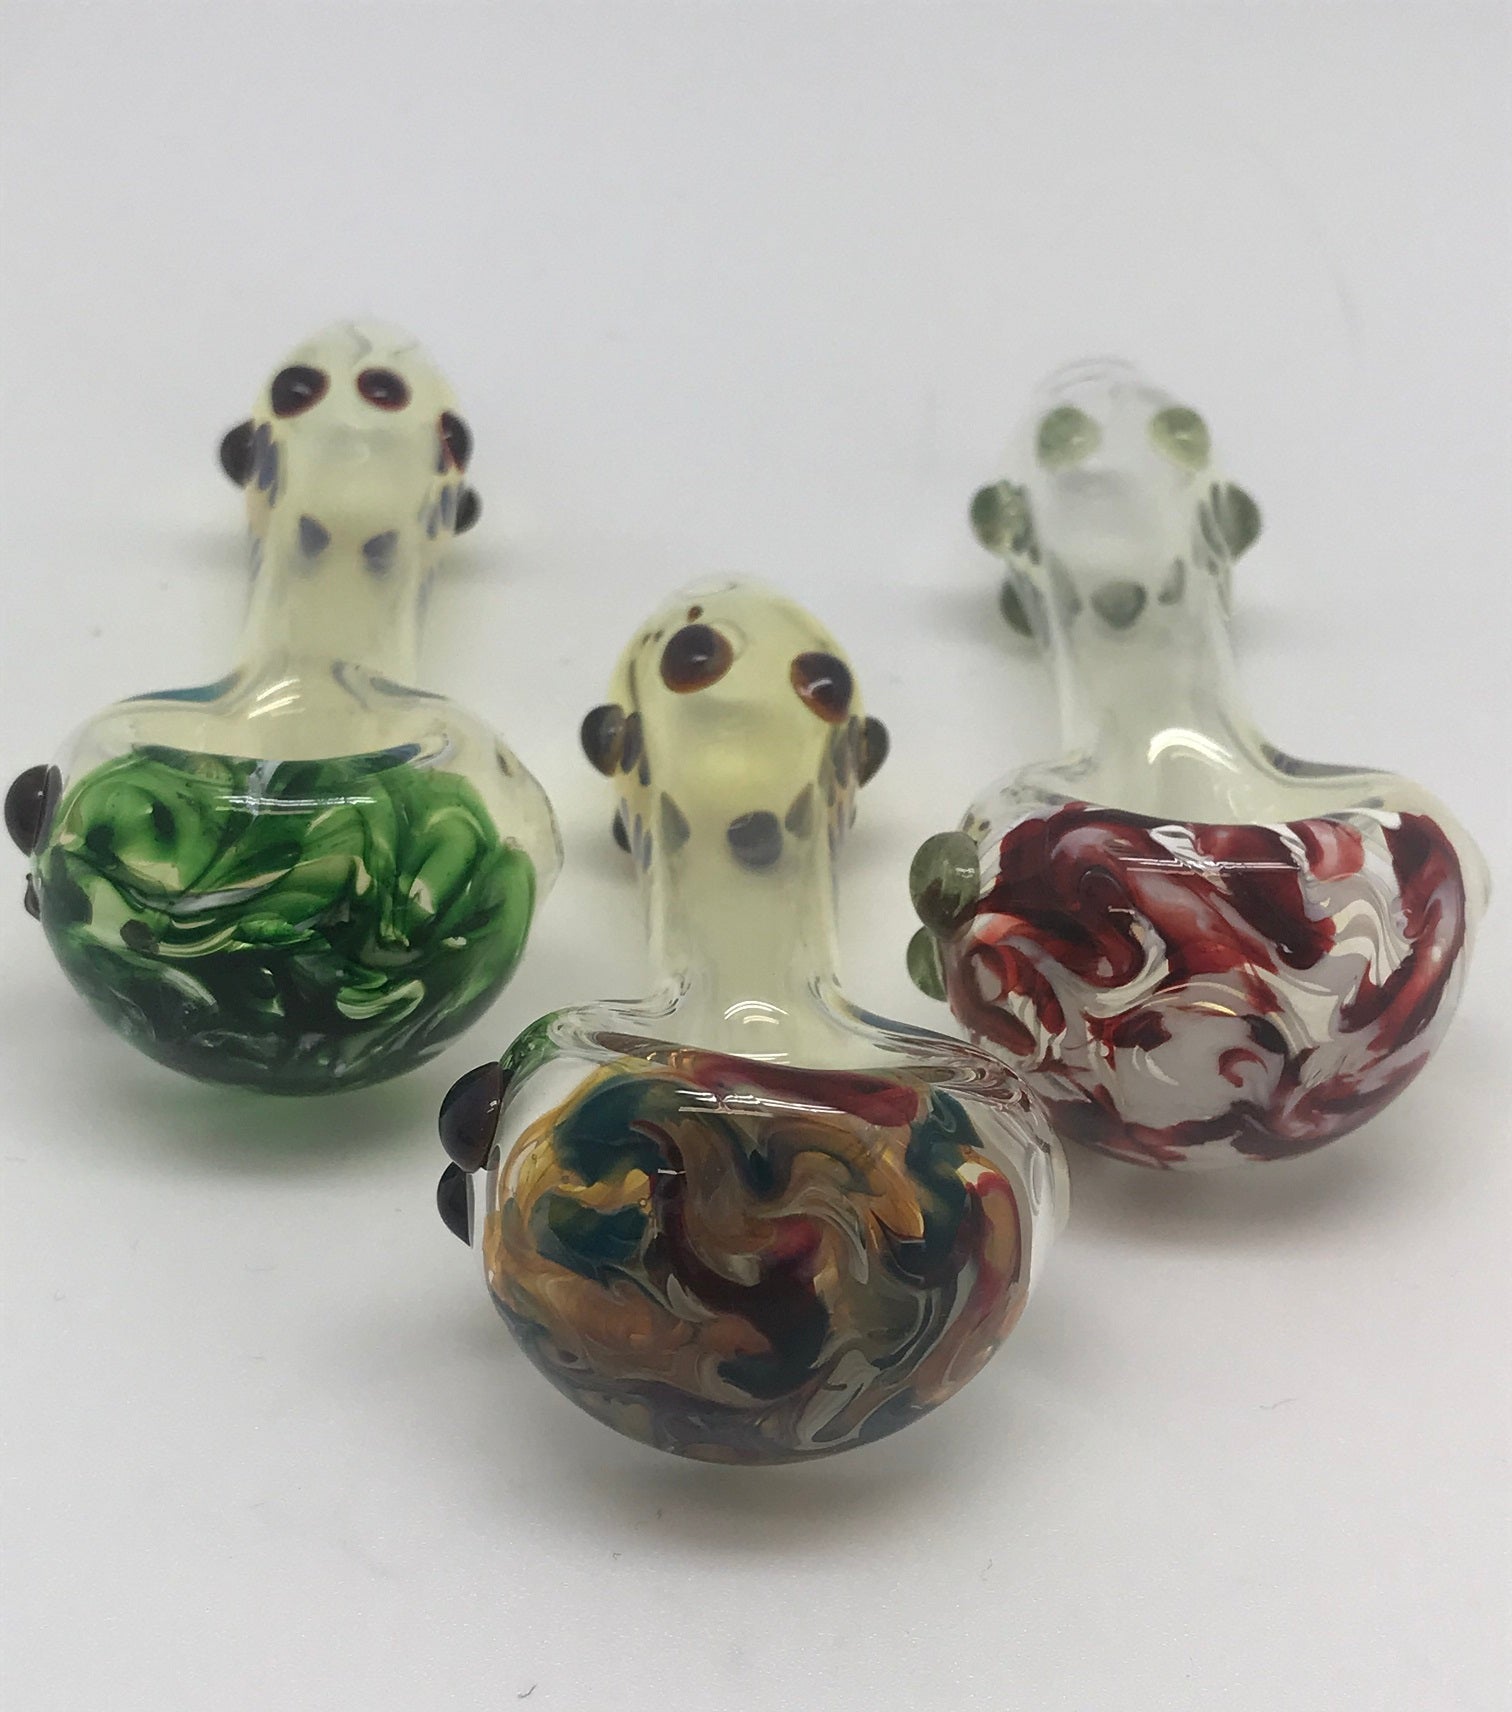 Steegee Glass Silver Fume Marbled Cap Pipe